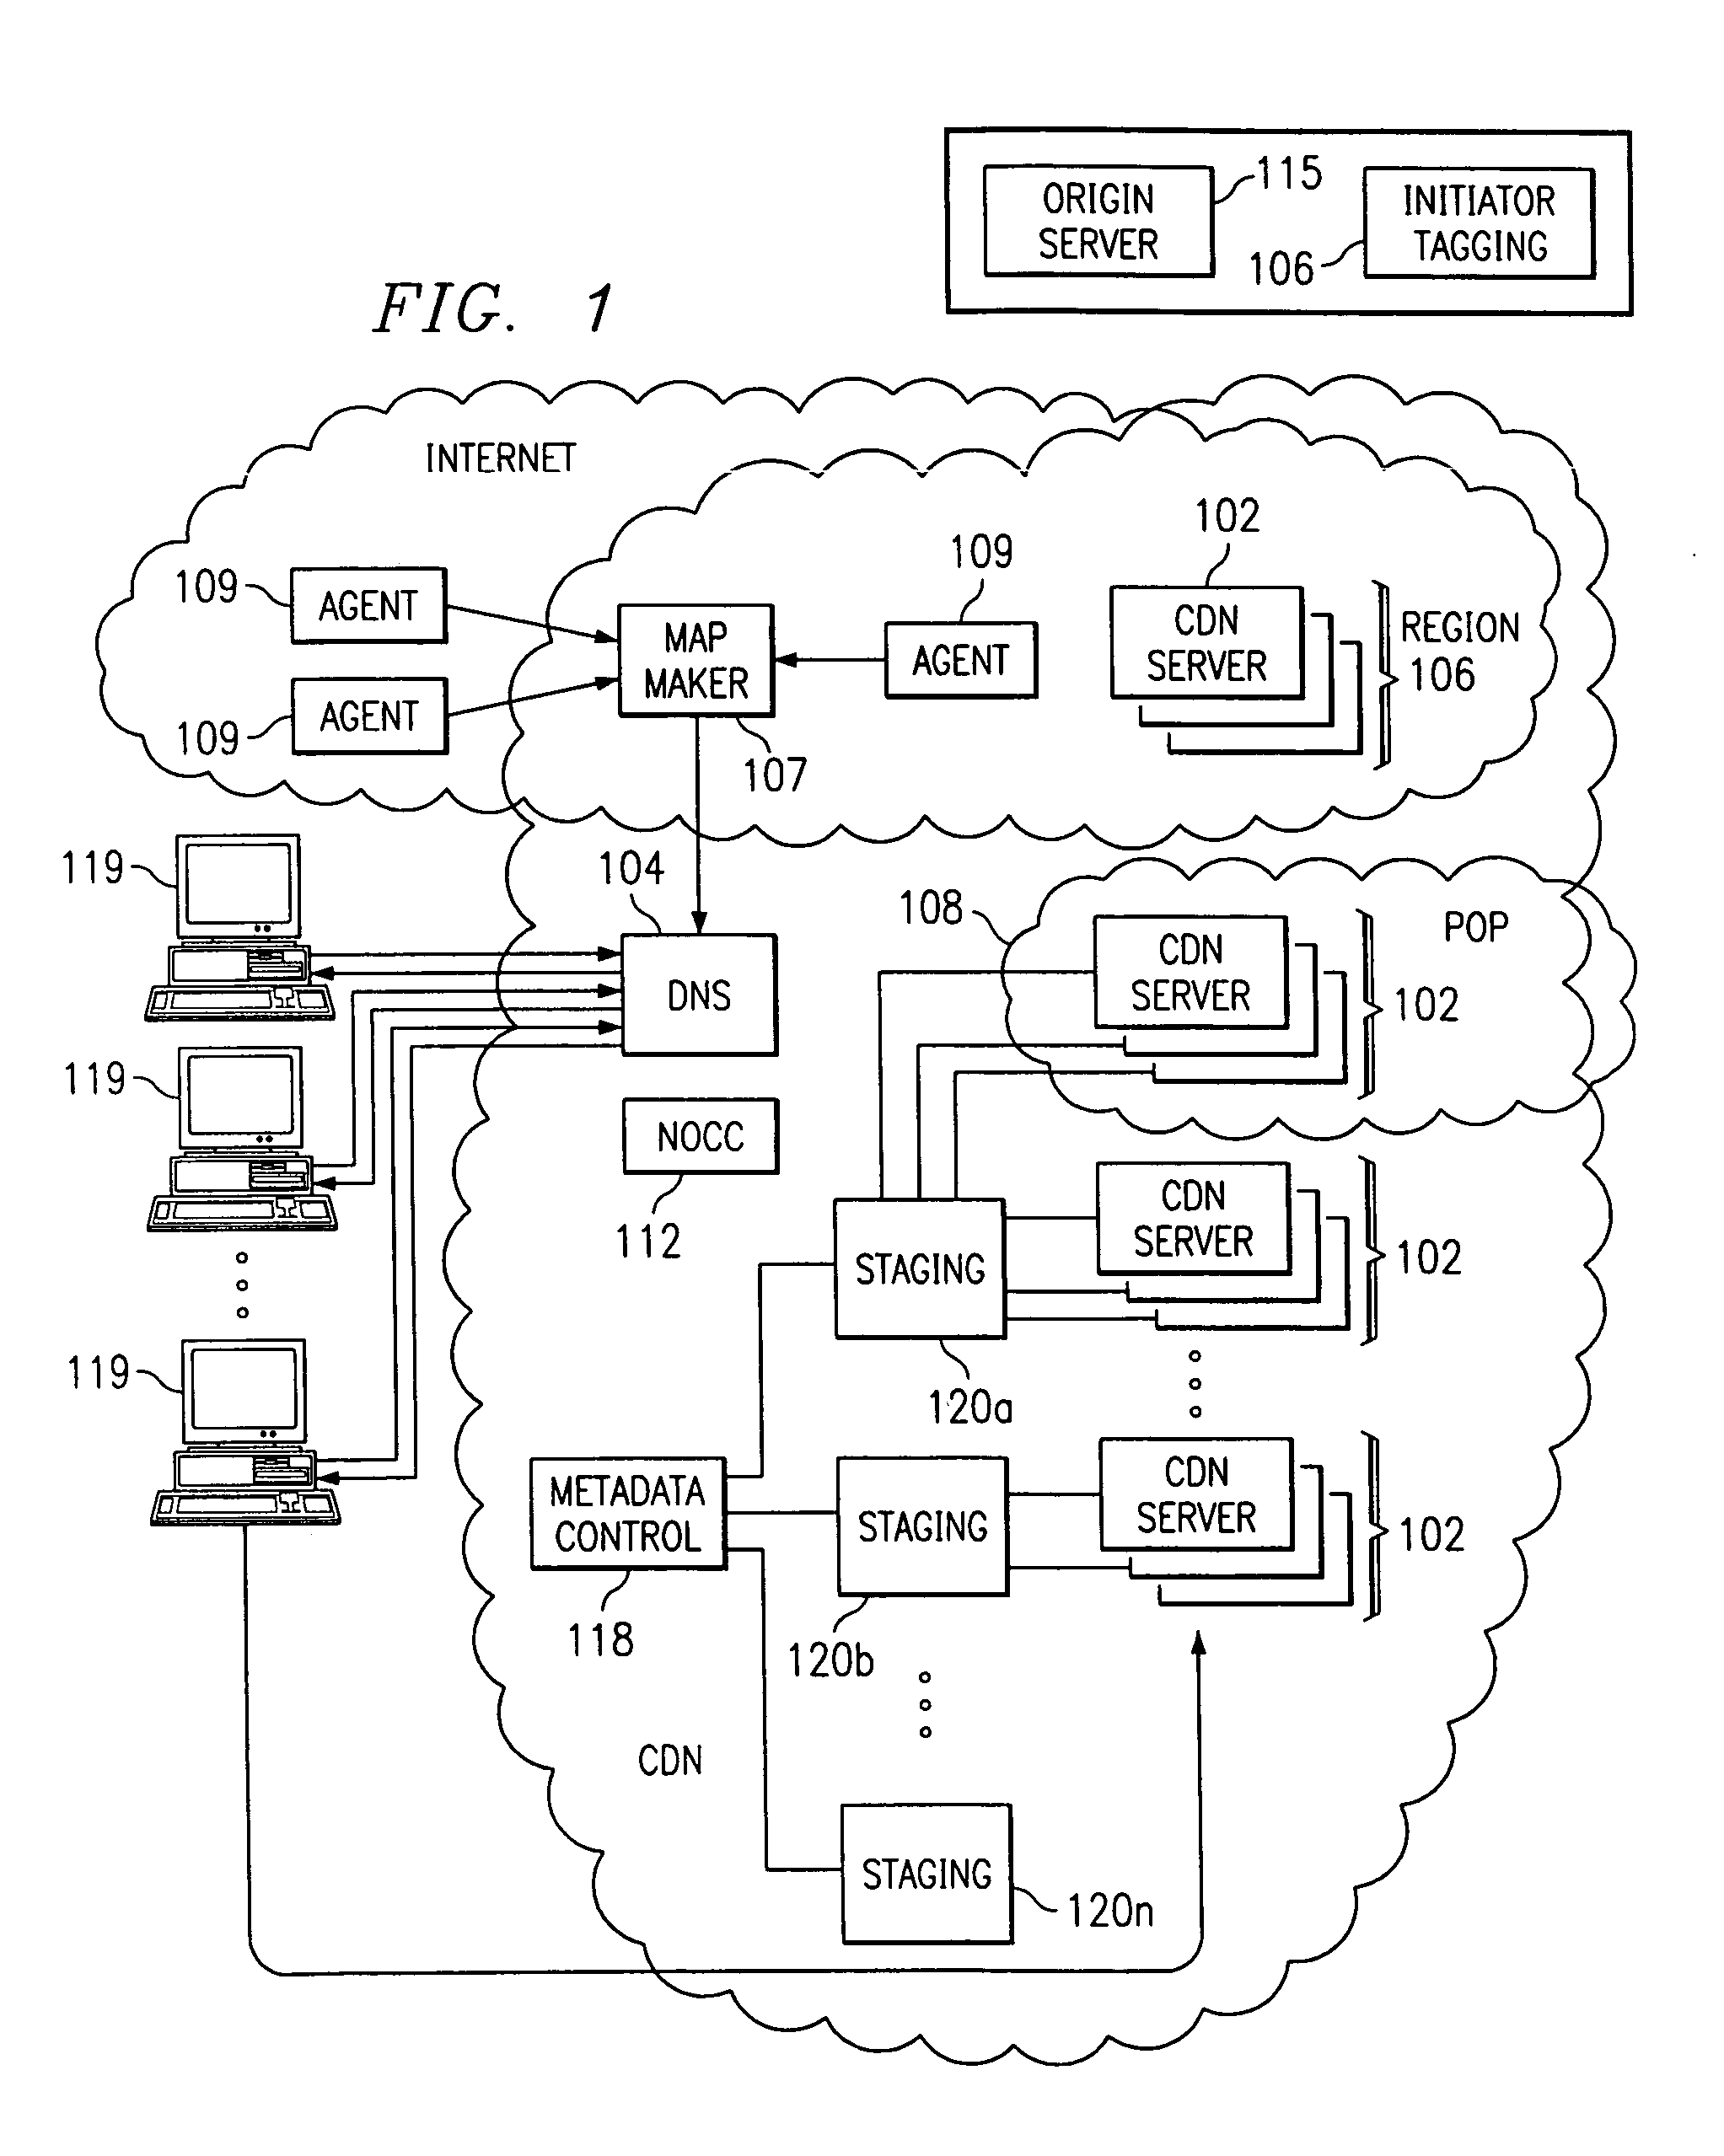 Content delivery network map generation using passive measurement data